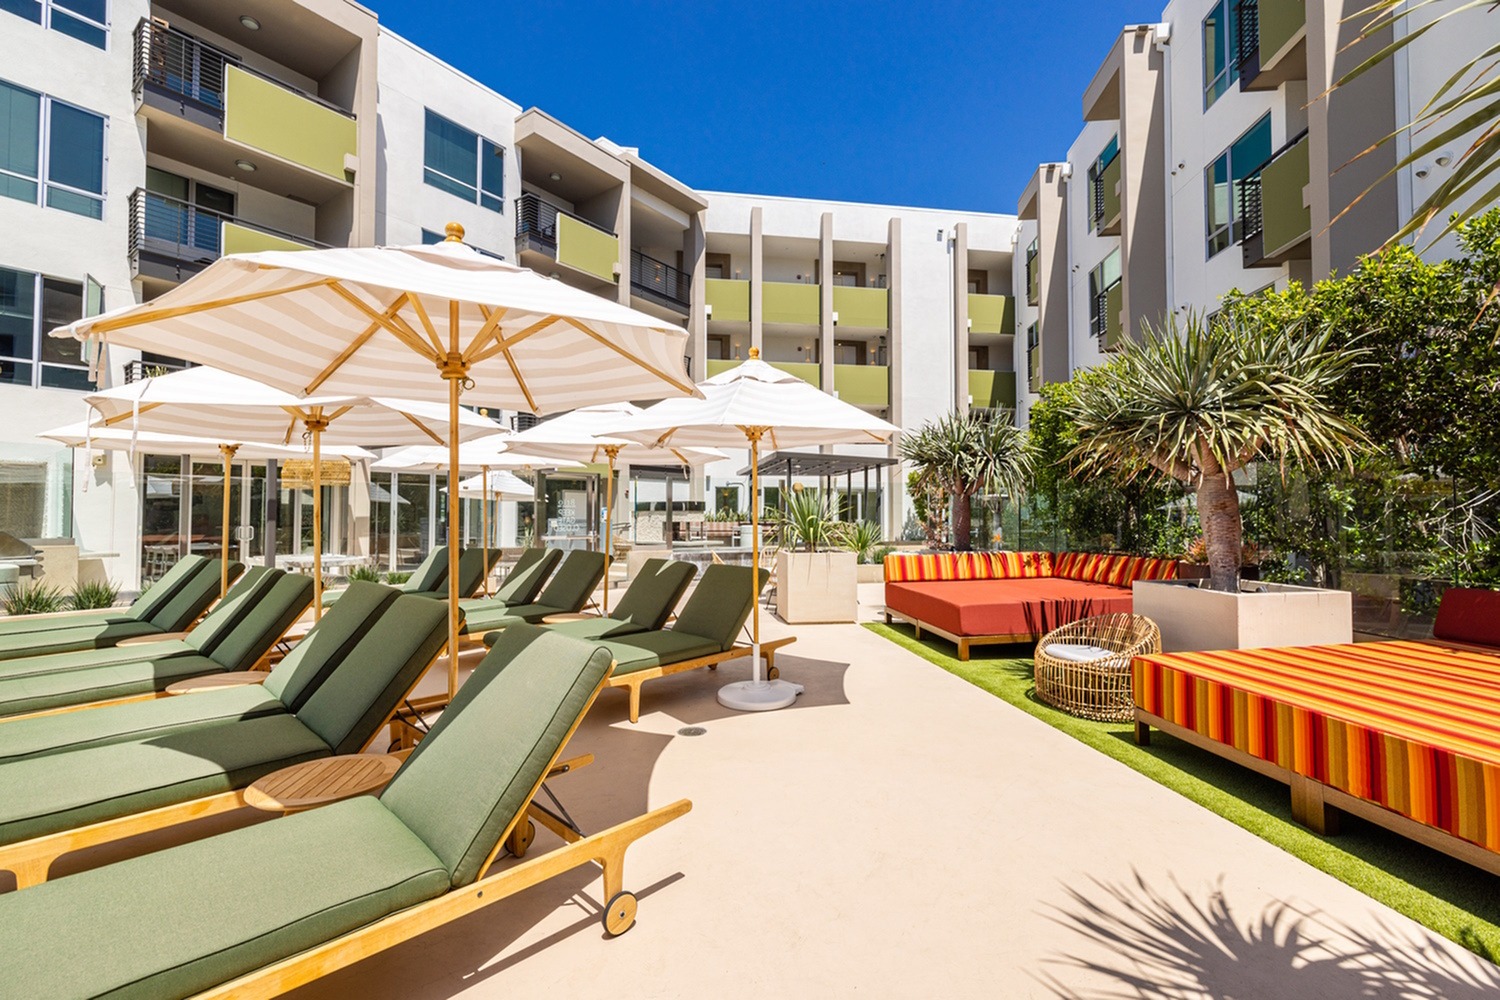 Pool Side Cabanas  | Brio Apartments | Apartments in Glendale, CA